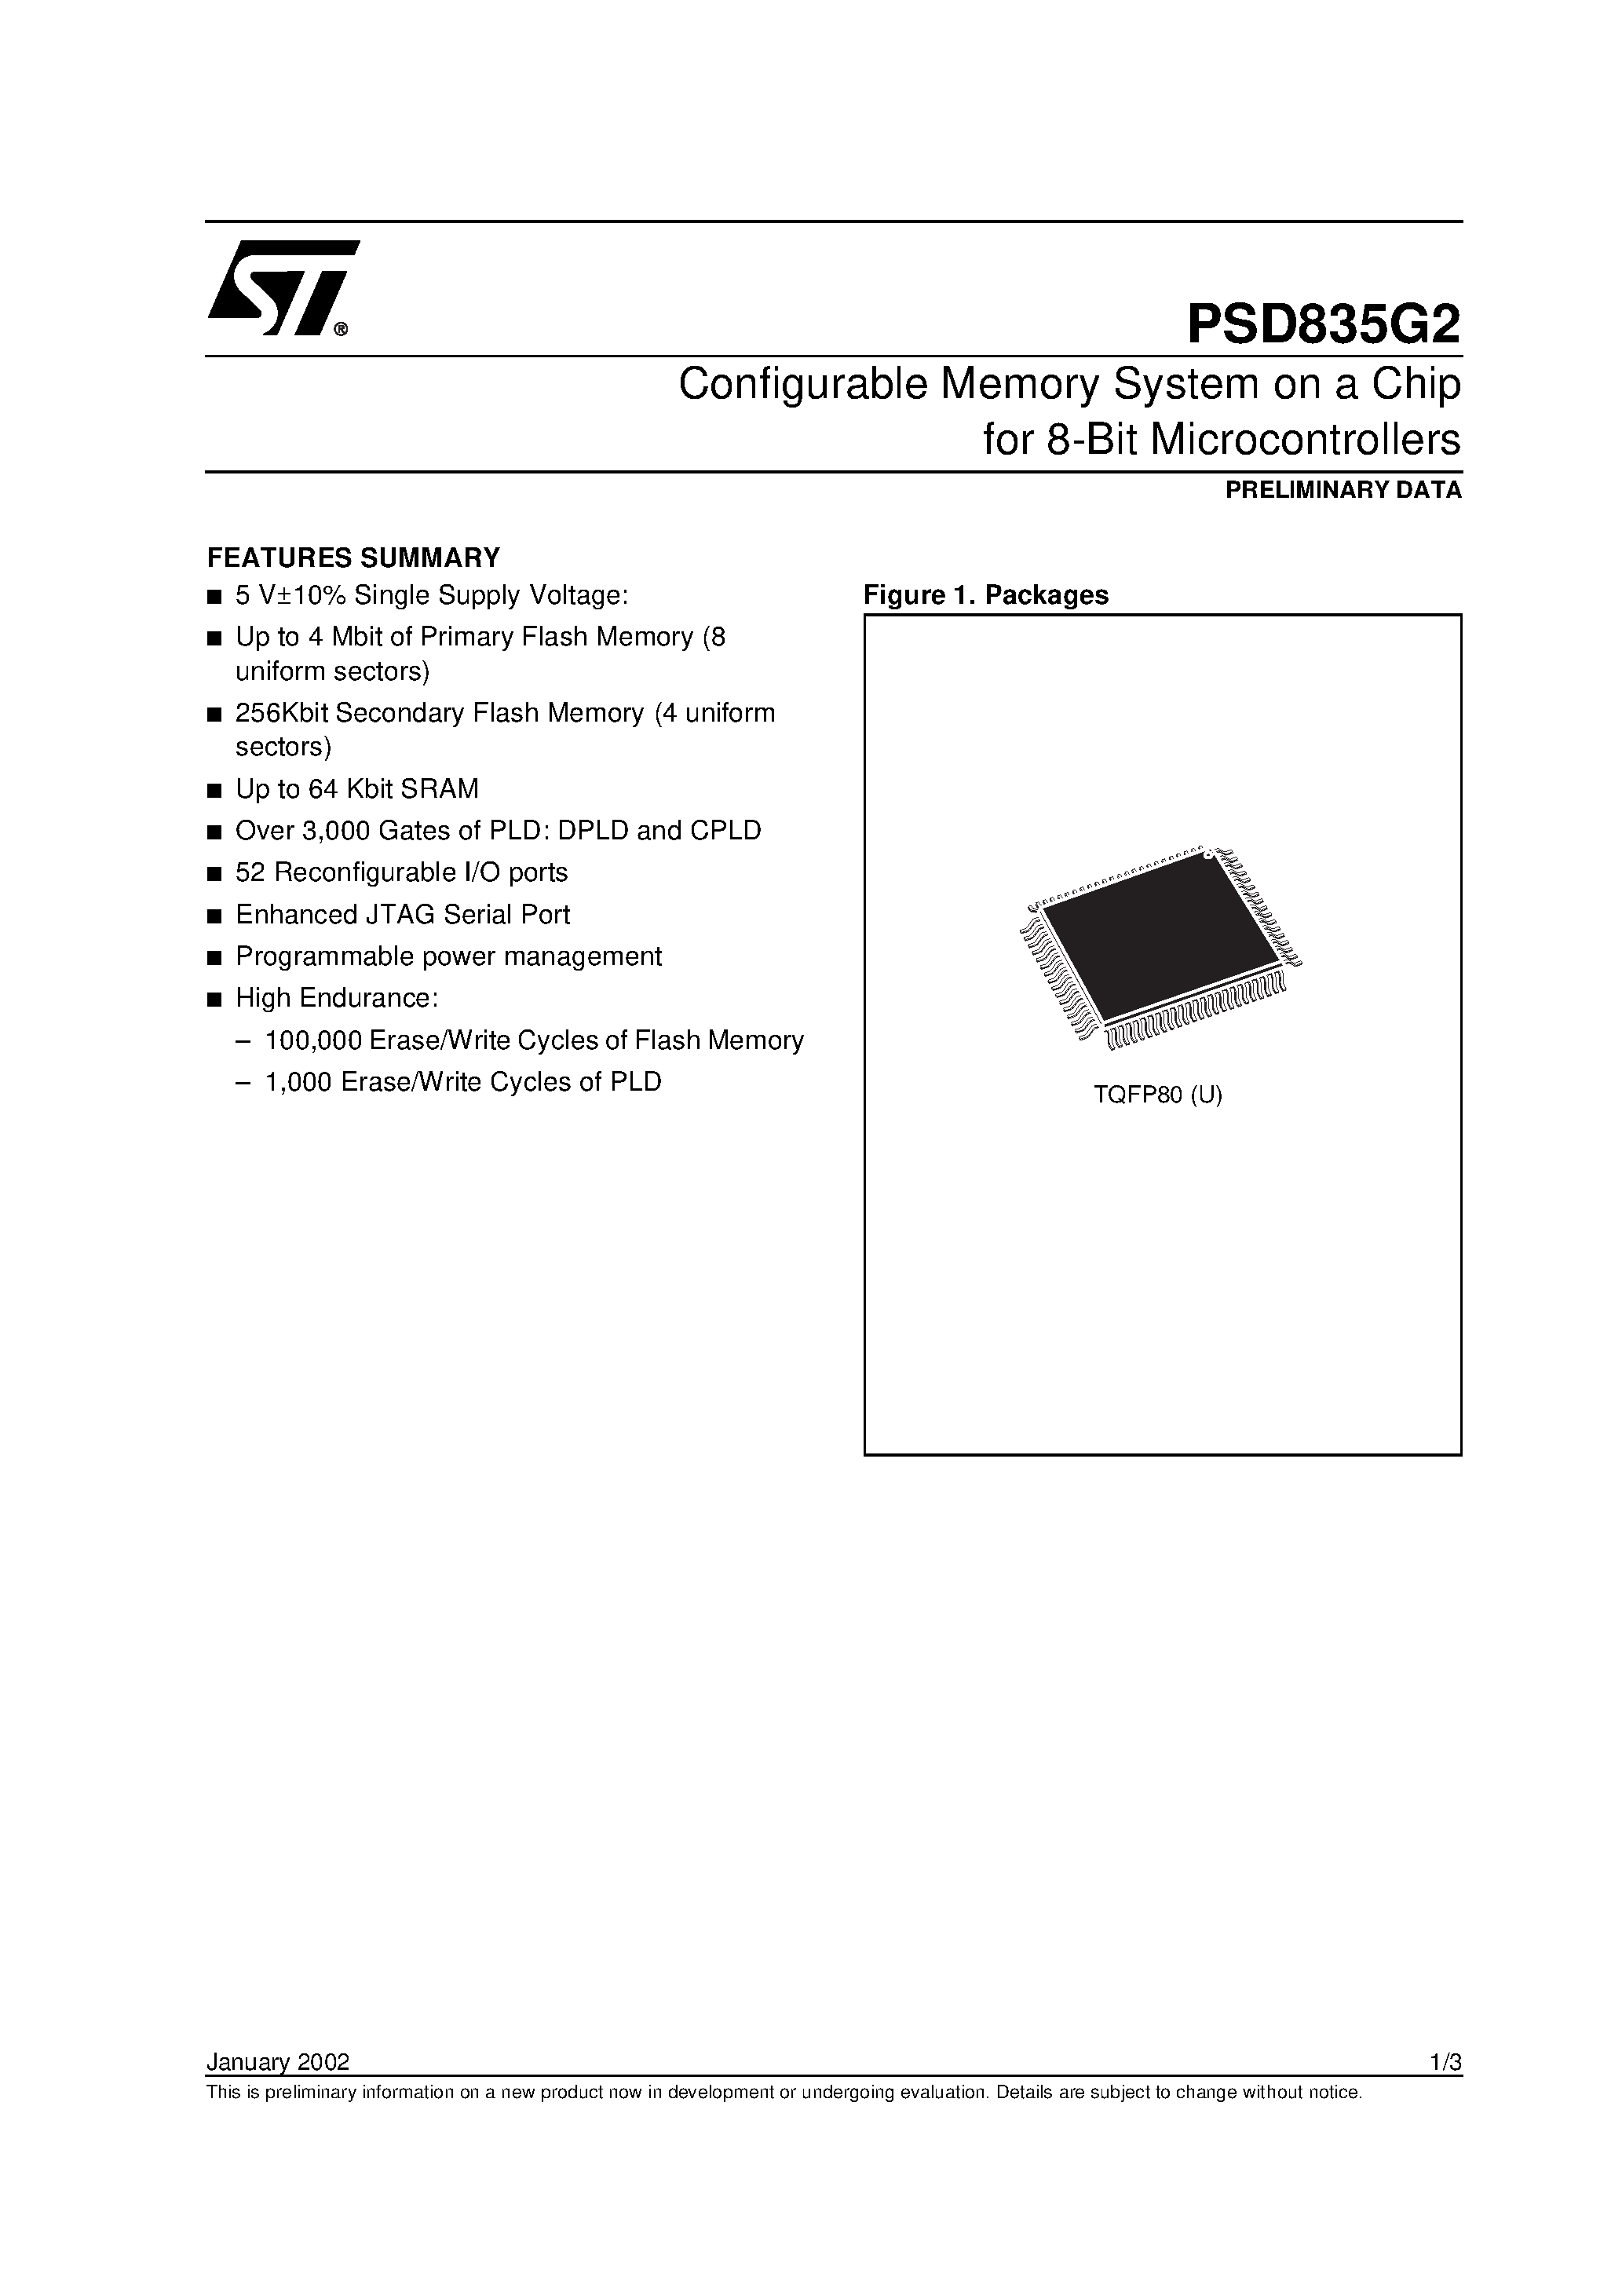 Datasheet PSD835F2-A-12U - Configurable Memory System on a Chip for 8-Bit Microcontrollers page 1